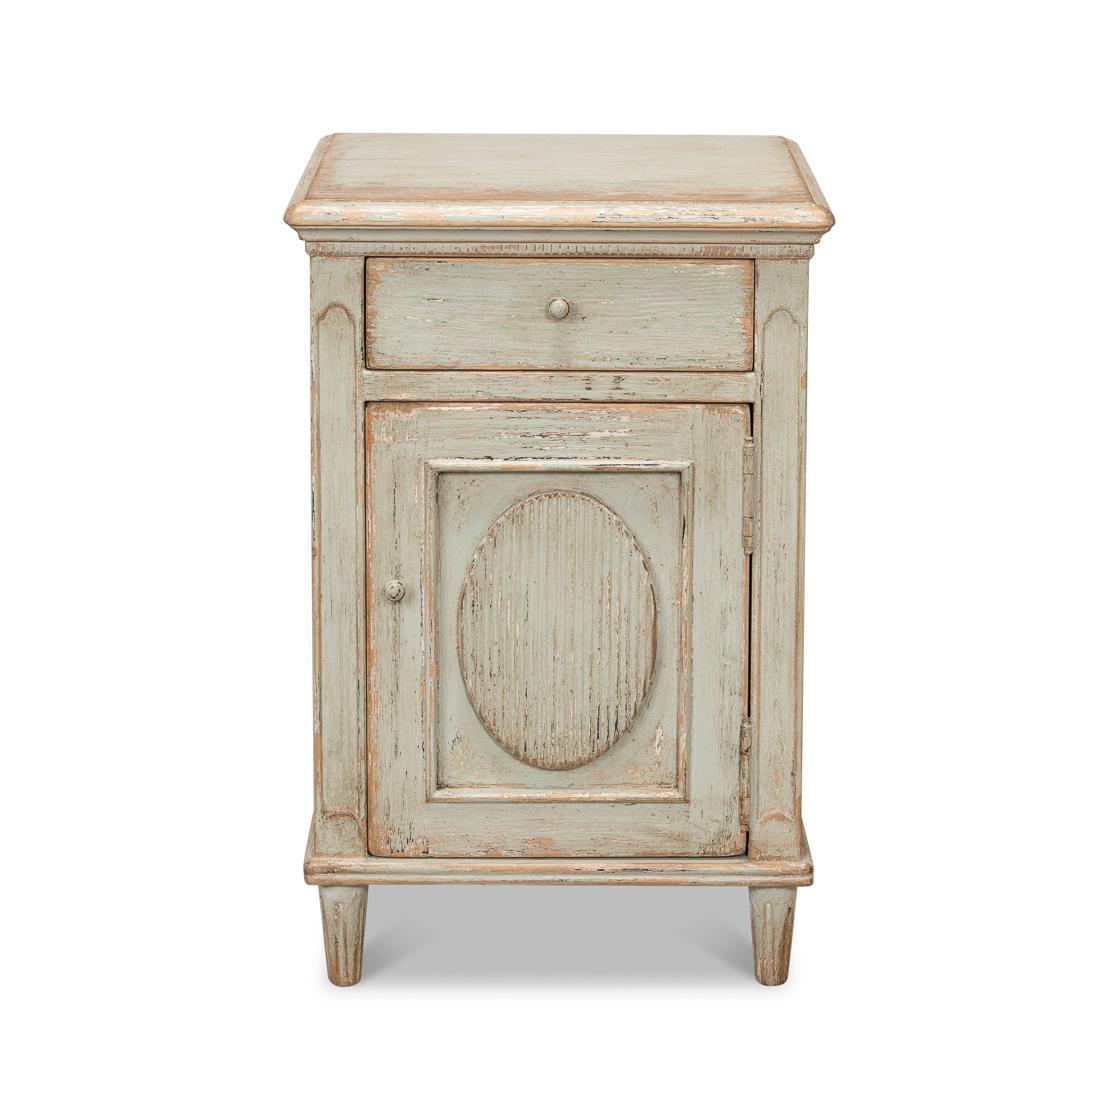 A French provincial design exuding a rustic allure with its distressed finish and classic style. The weathered look provides a sense of history and character. With a molded square top, above a single drawer and one-door cupboard raised on tapered